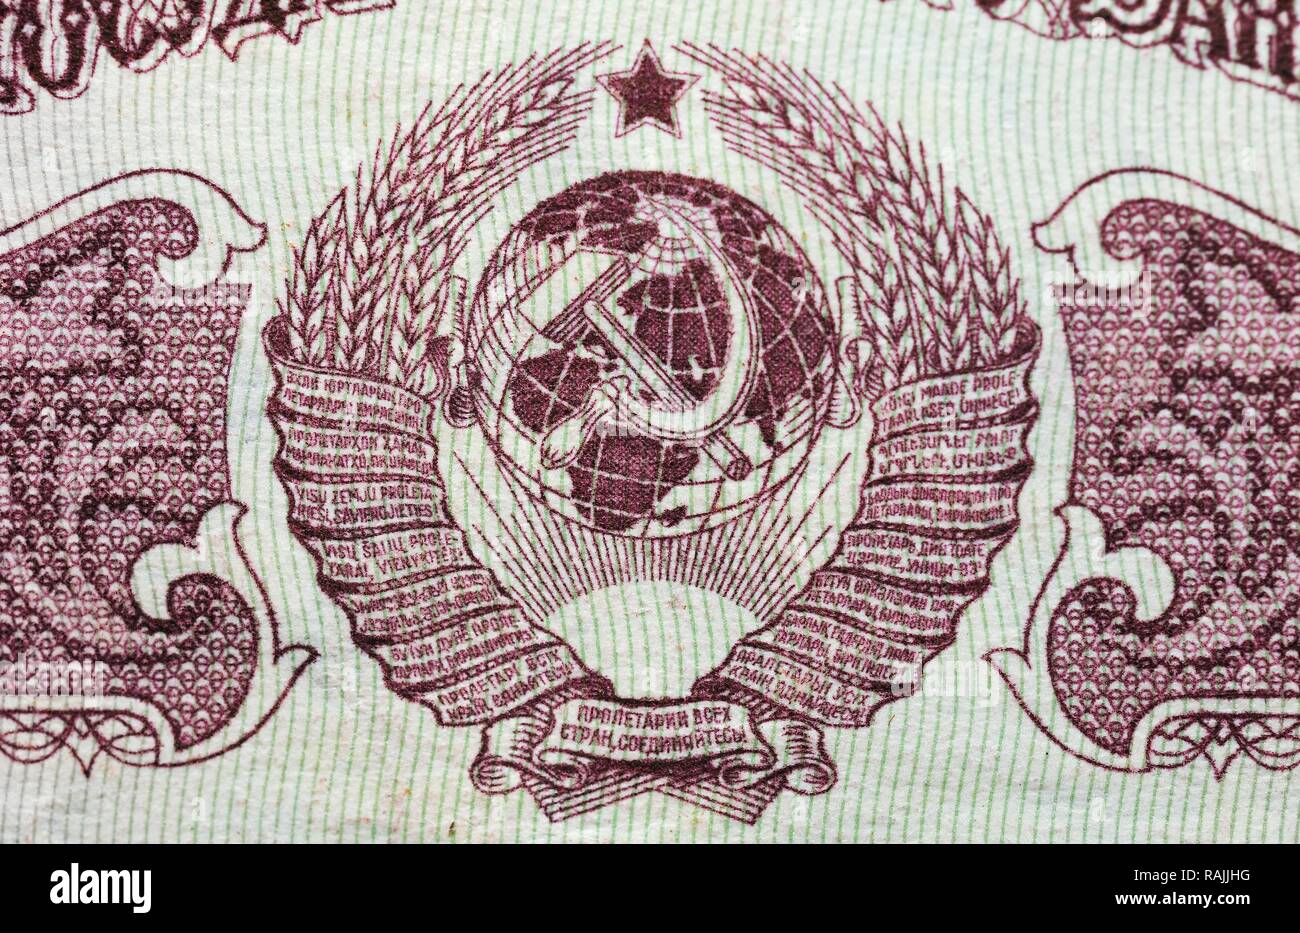 Coat of arms of the Soviet Union, USSR, detail of historic banknote, 25 Soviet Union rubles, 1961 Stock Photo